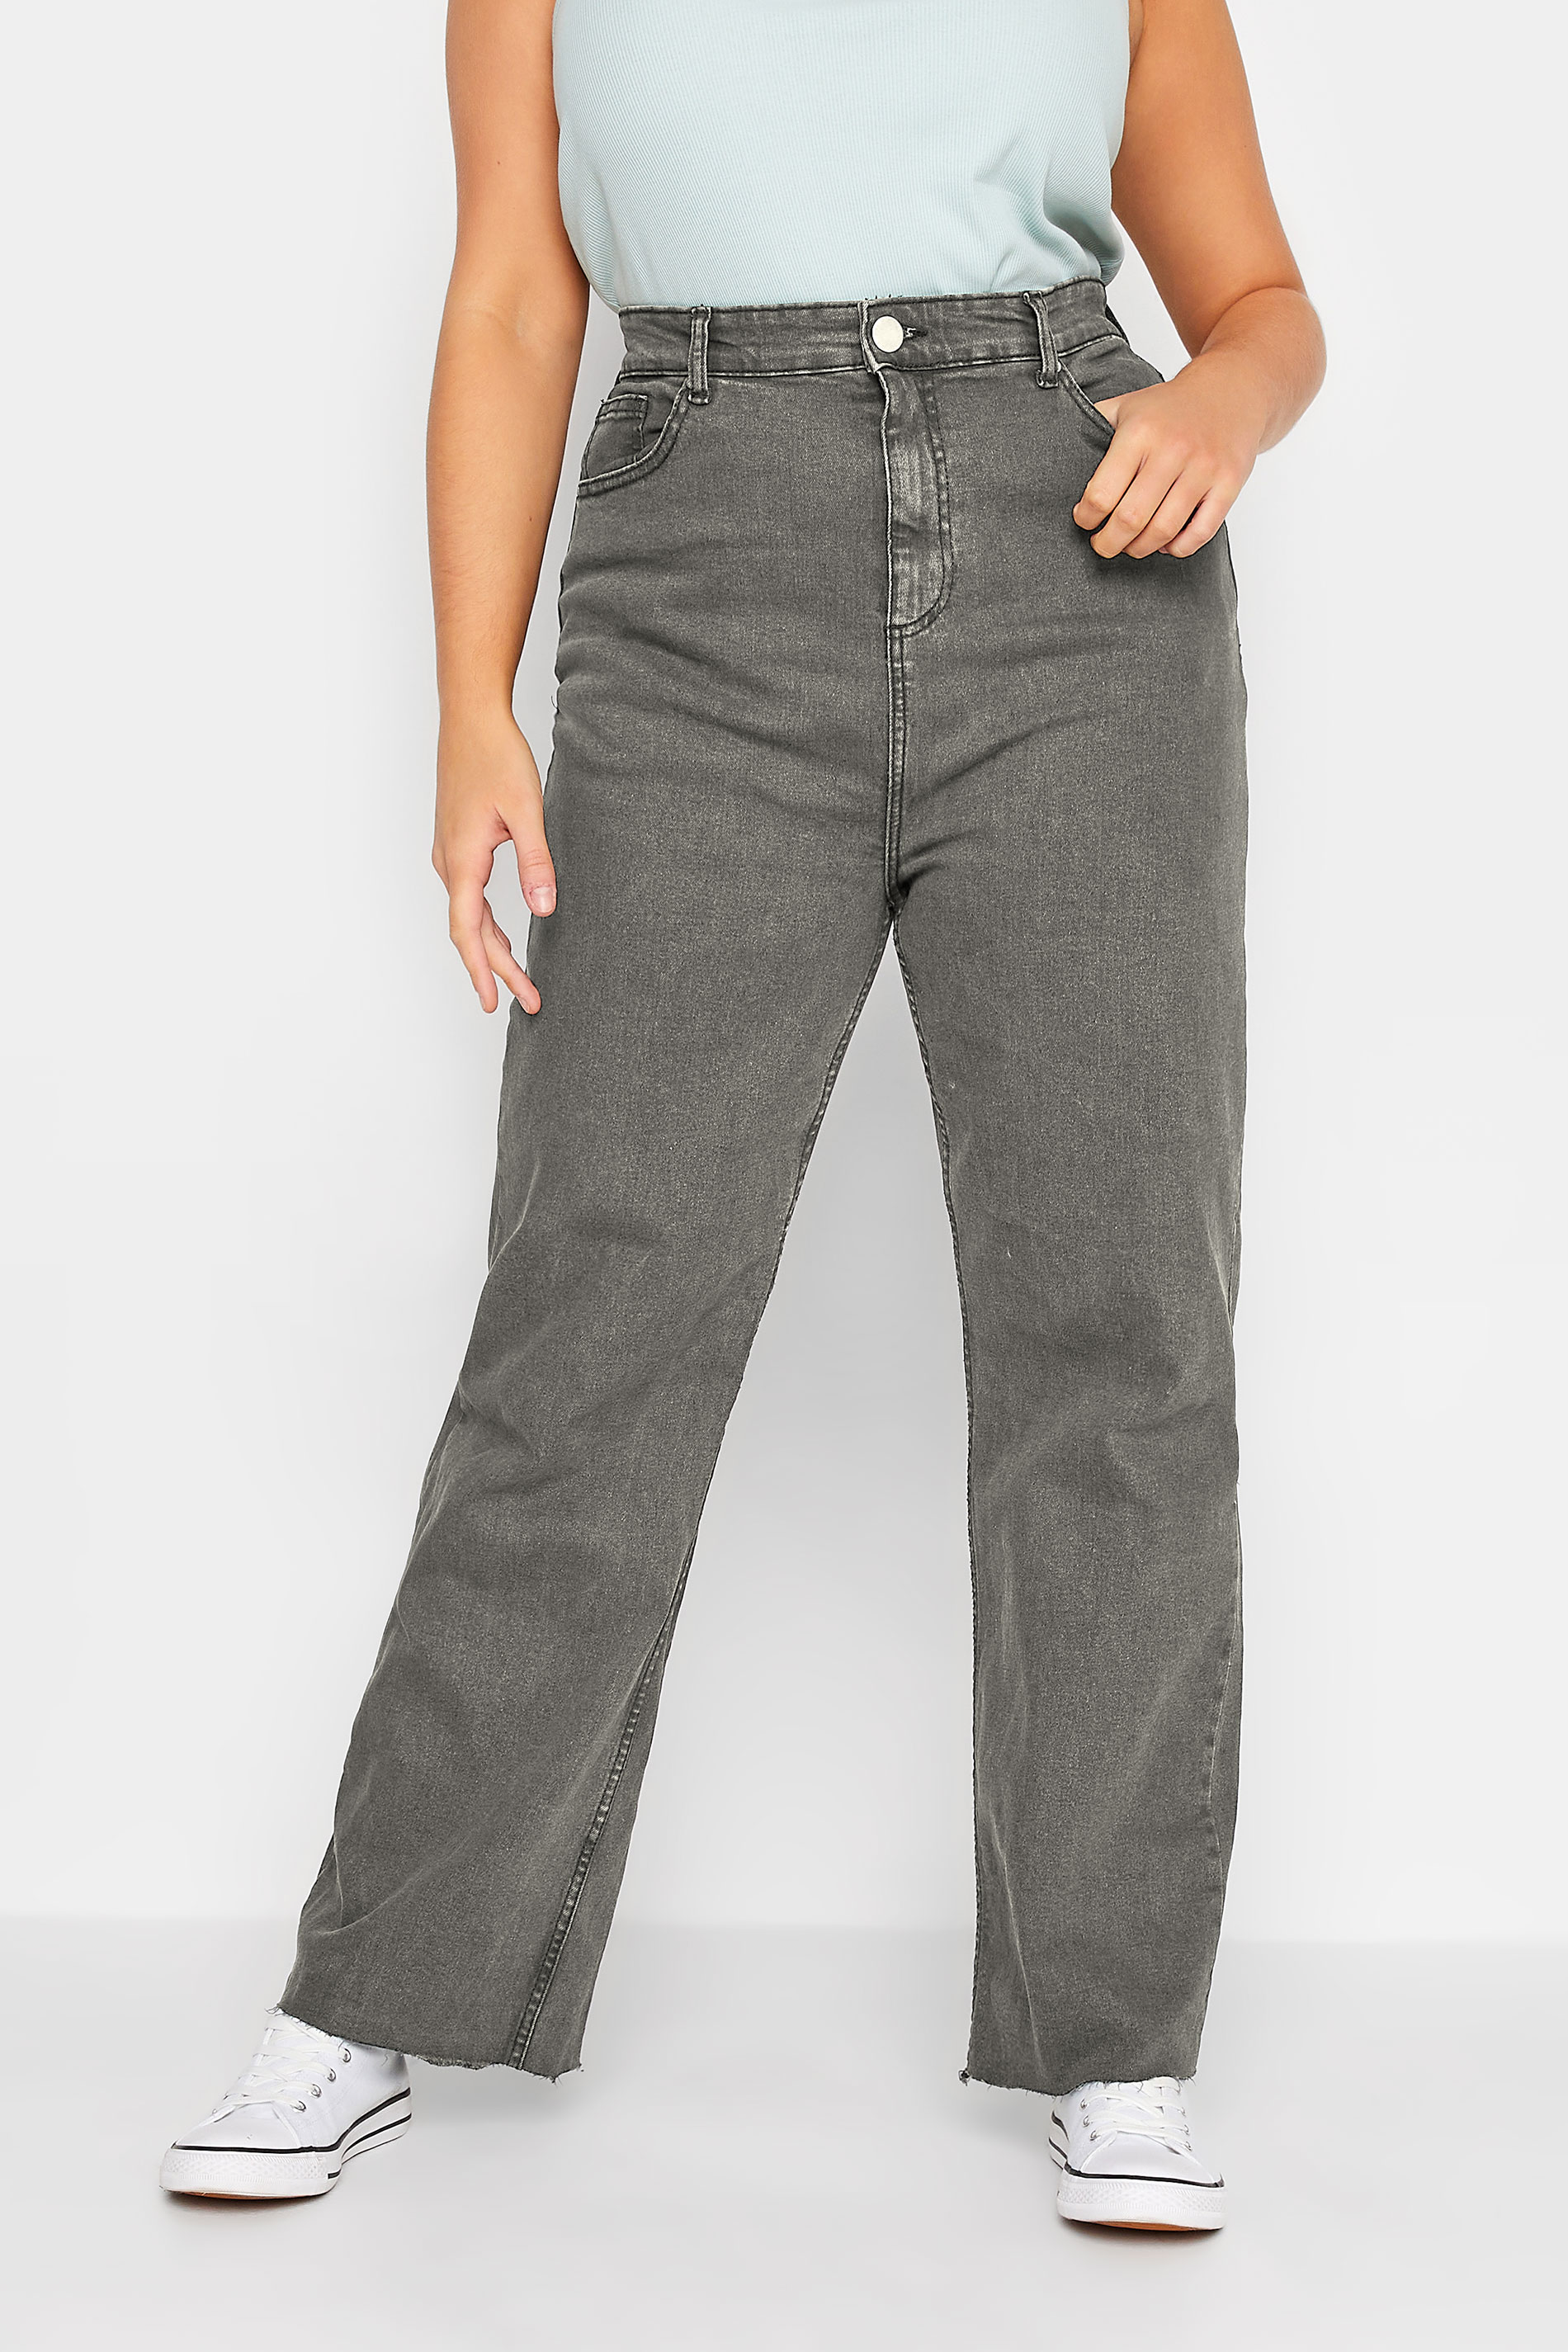 Plus Size Grey Stretch Wide Leg Jeans | Yours Clothing  1